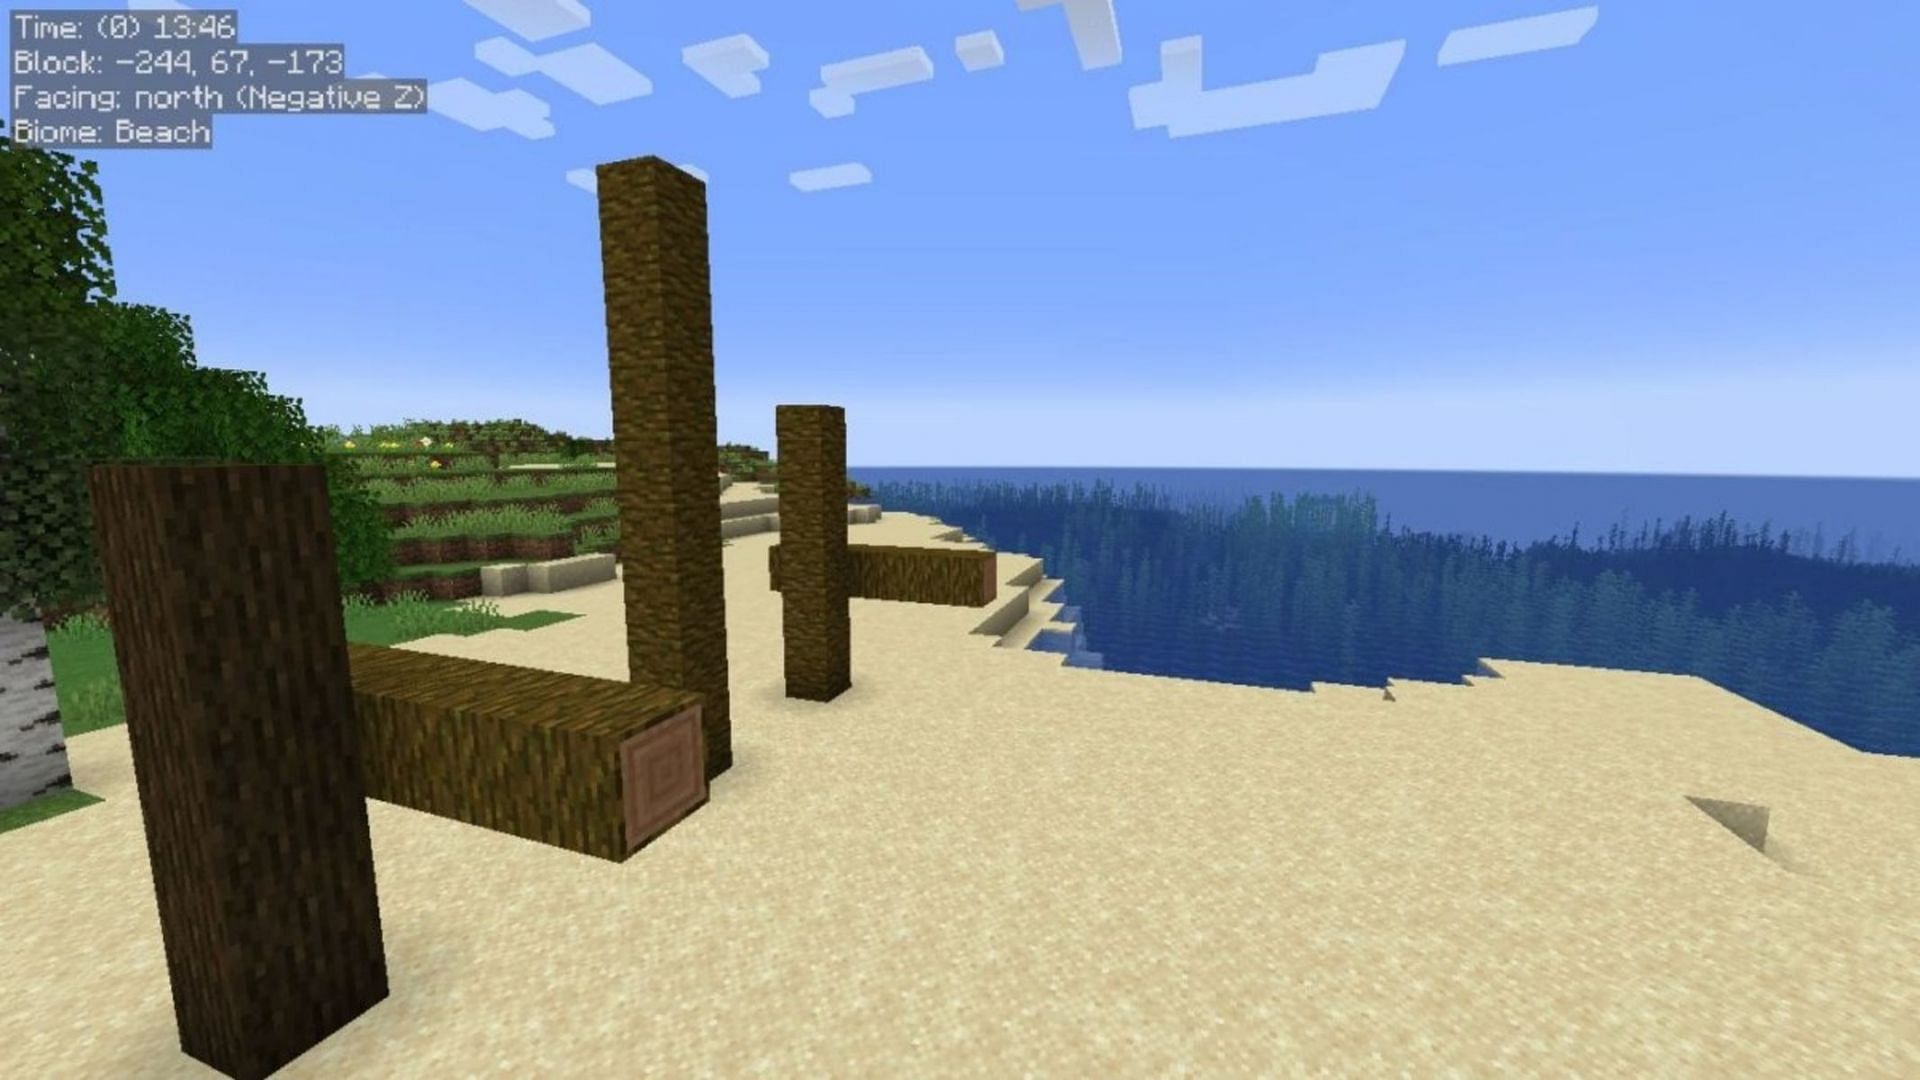 This ocean seed provides a bounty of structures and seagrass (Image via MinecraftSeeds)